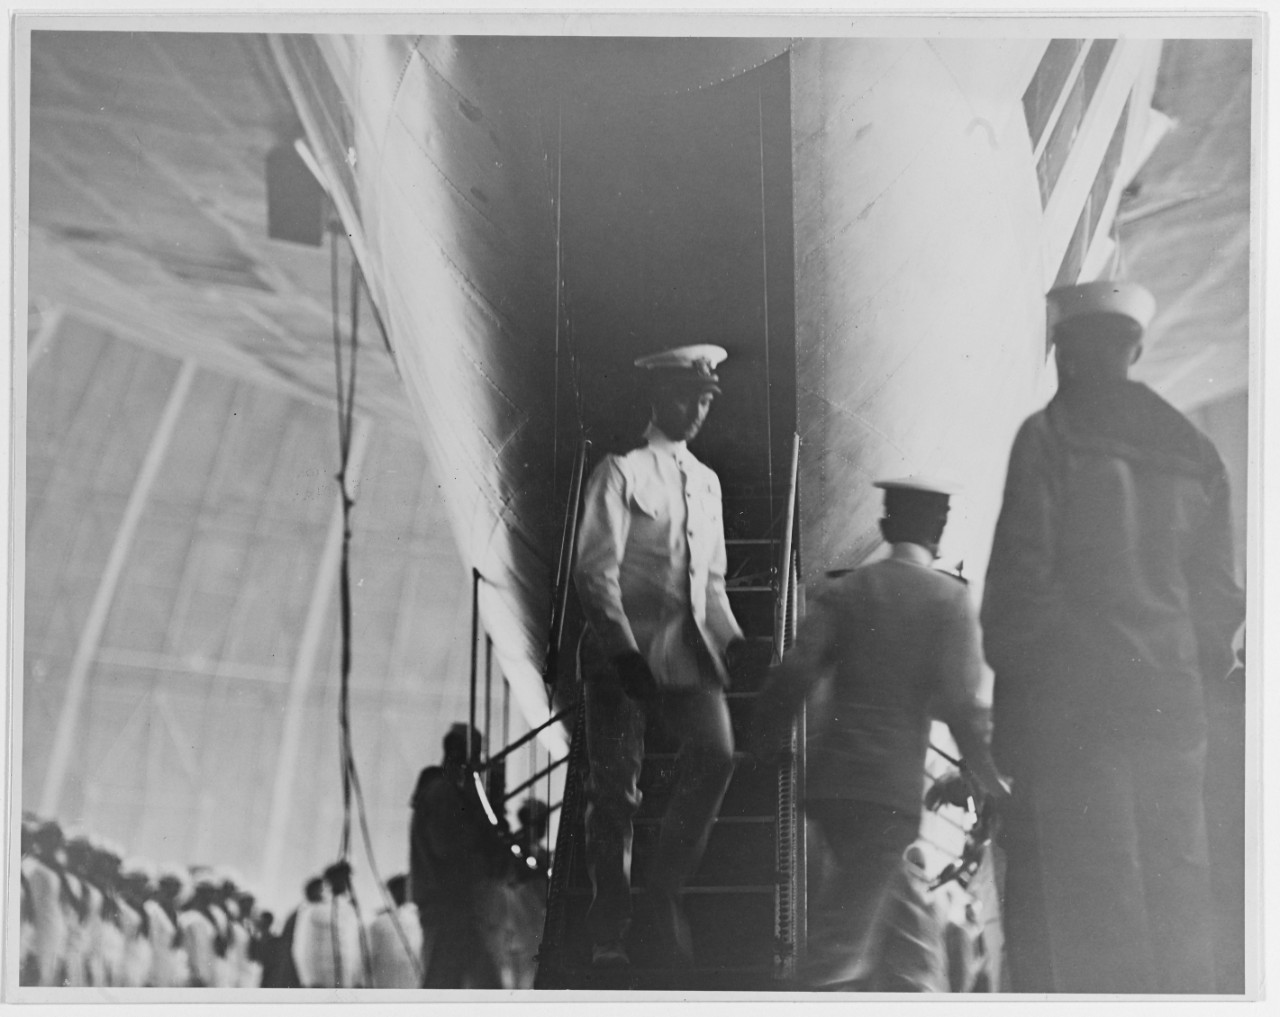 Photo #: NH 46110  Christening of USS Akron (ZRS-4), 8 August 1931